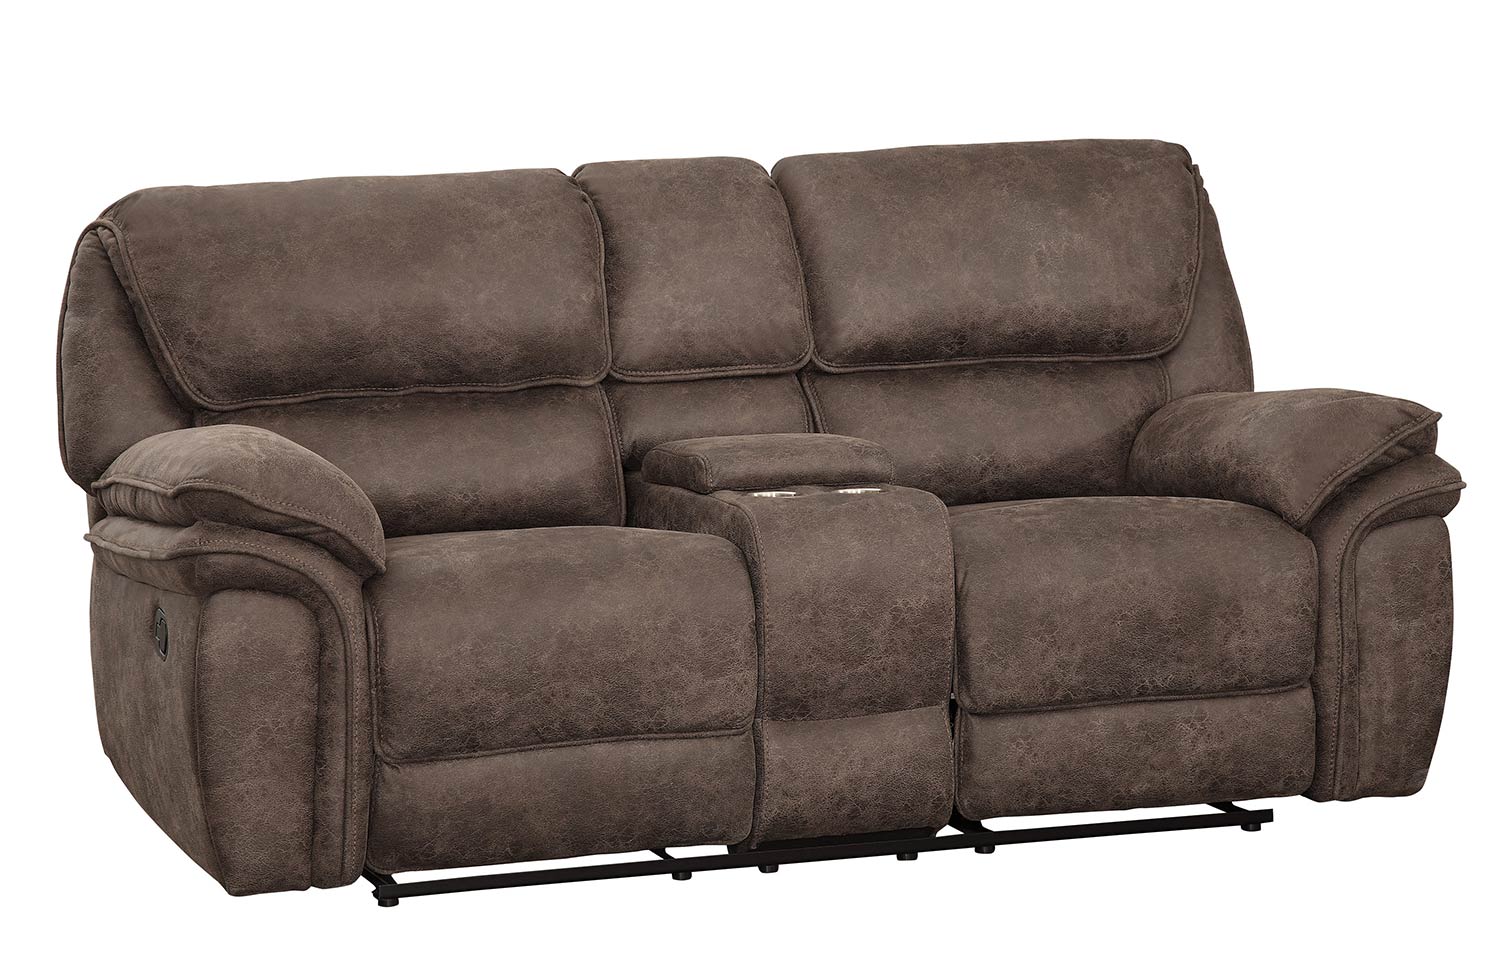 Homelegance Hadden Double Reclining Love Seat With Center Console - Dark Brown